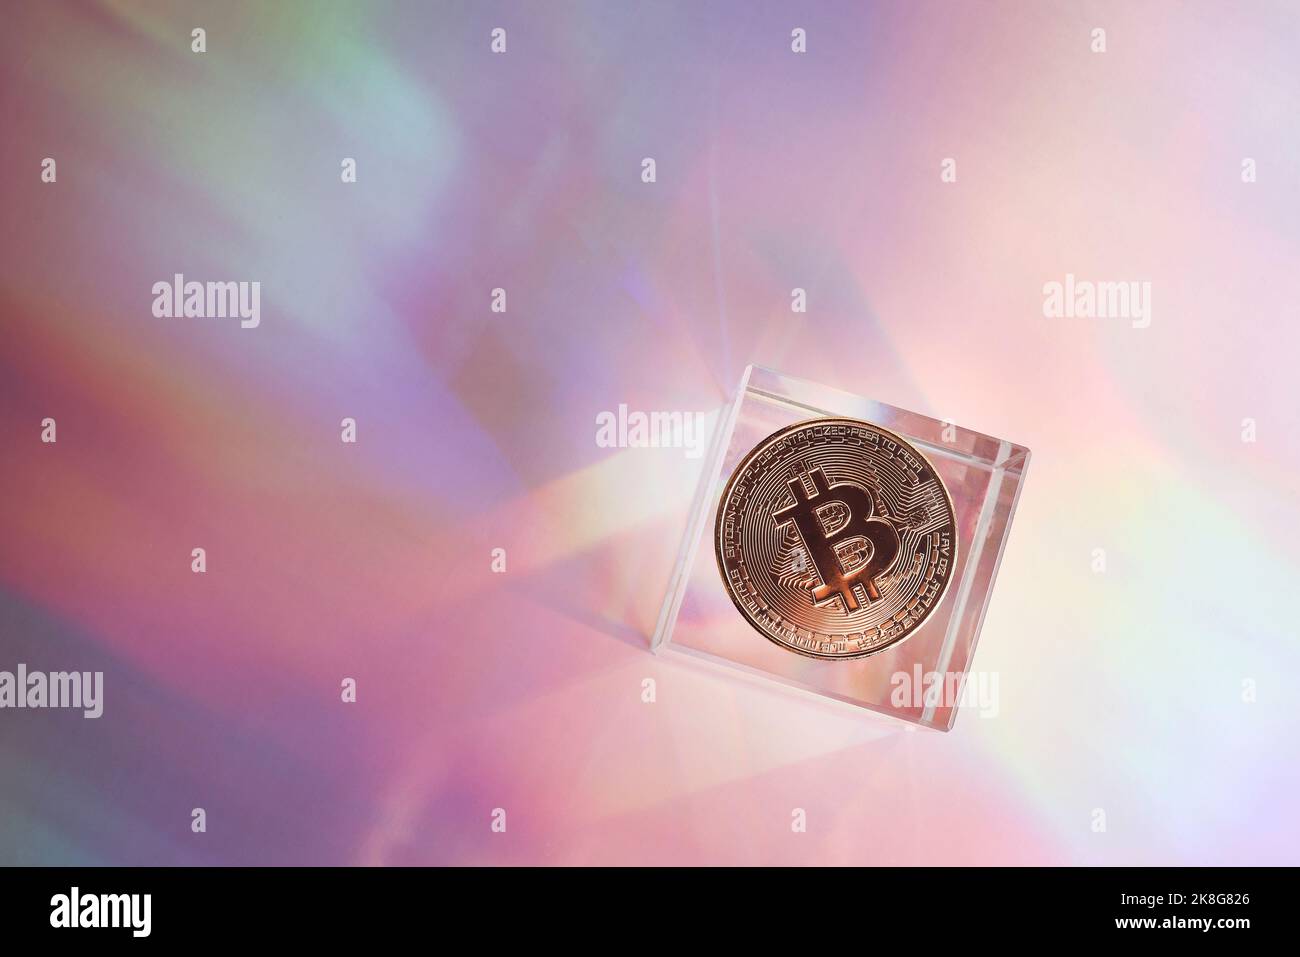 Golden bitcoin coin on holographic, abstract, neon background. digital currency, business style. Mining and trade bitcoin concept. Stock Photo